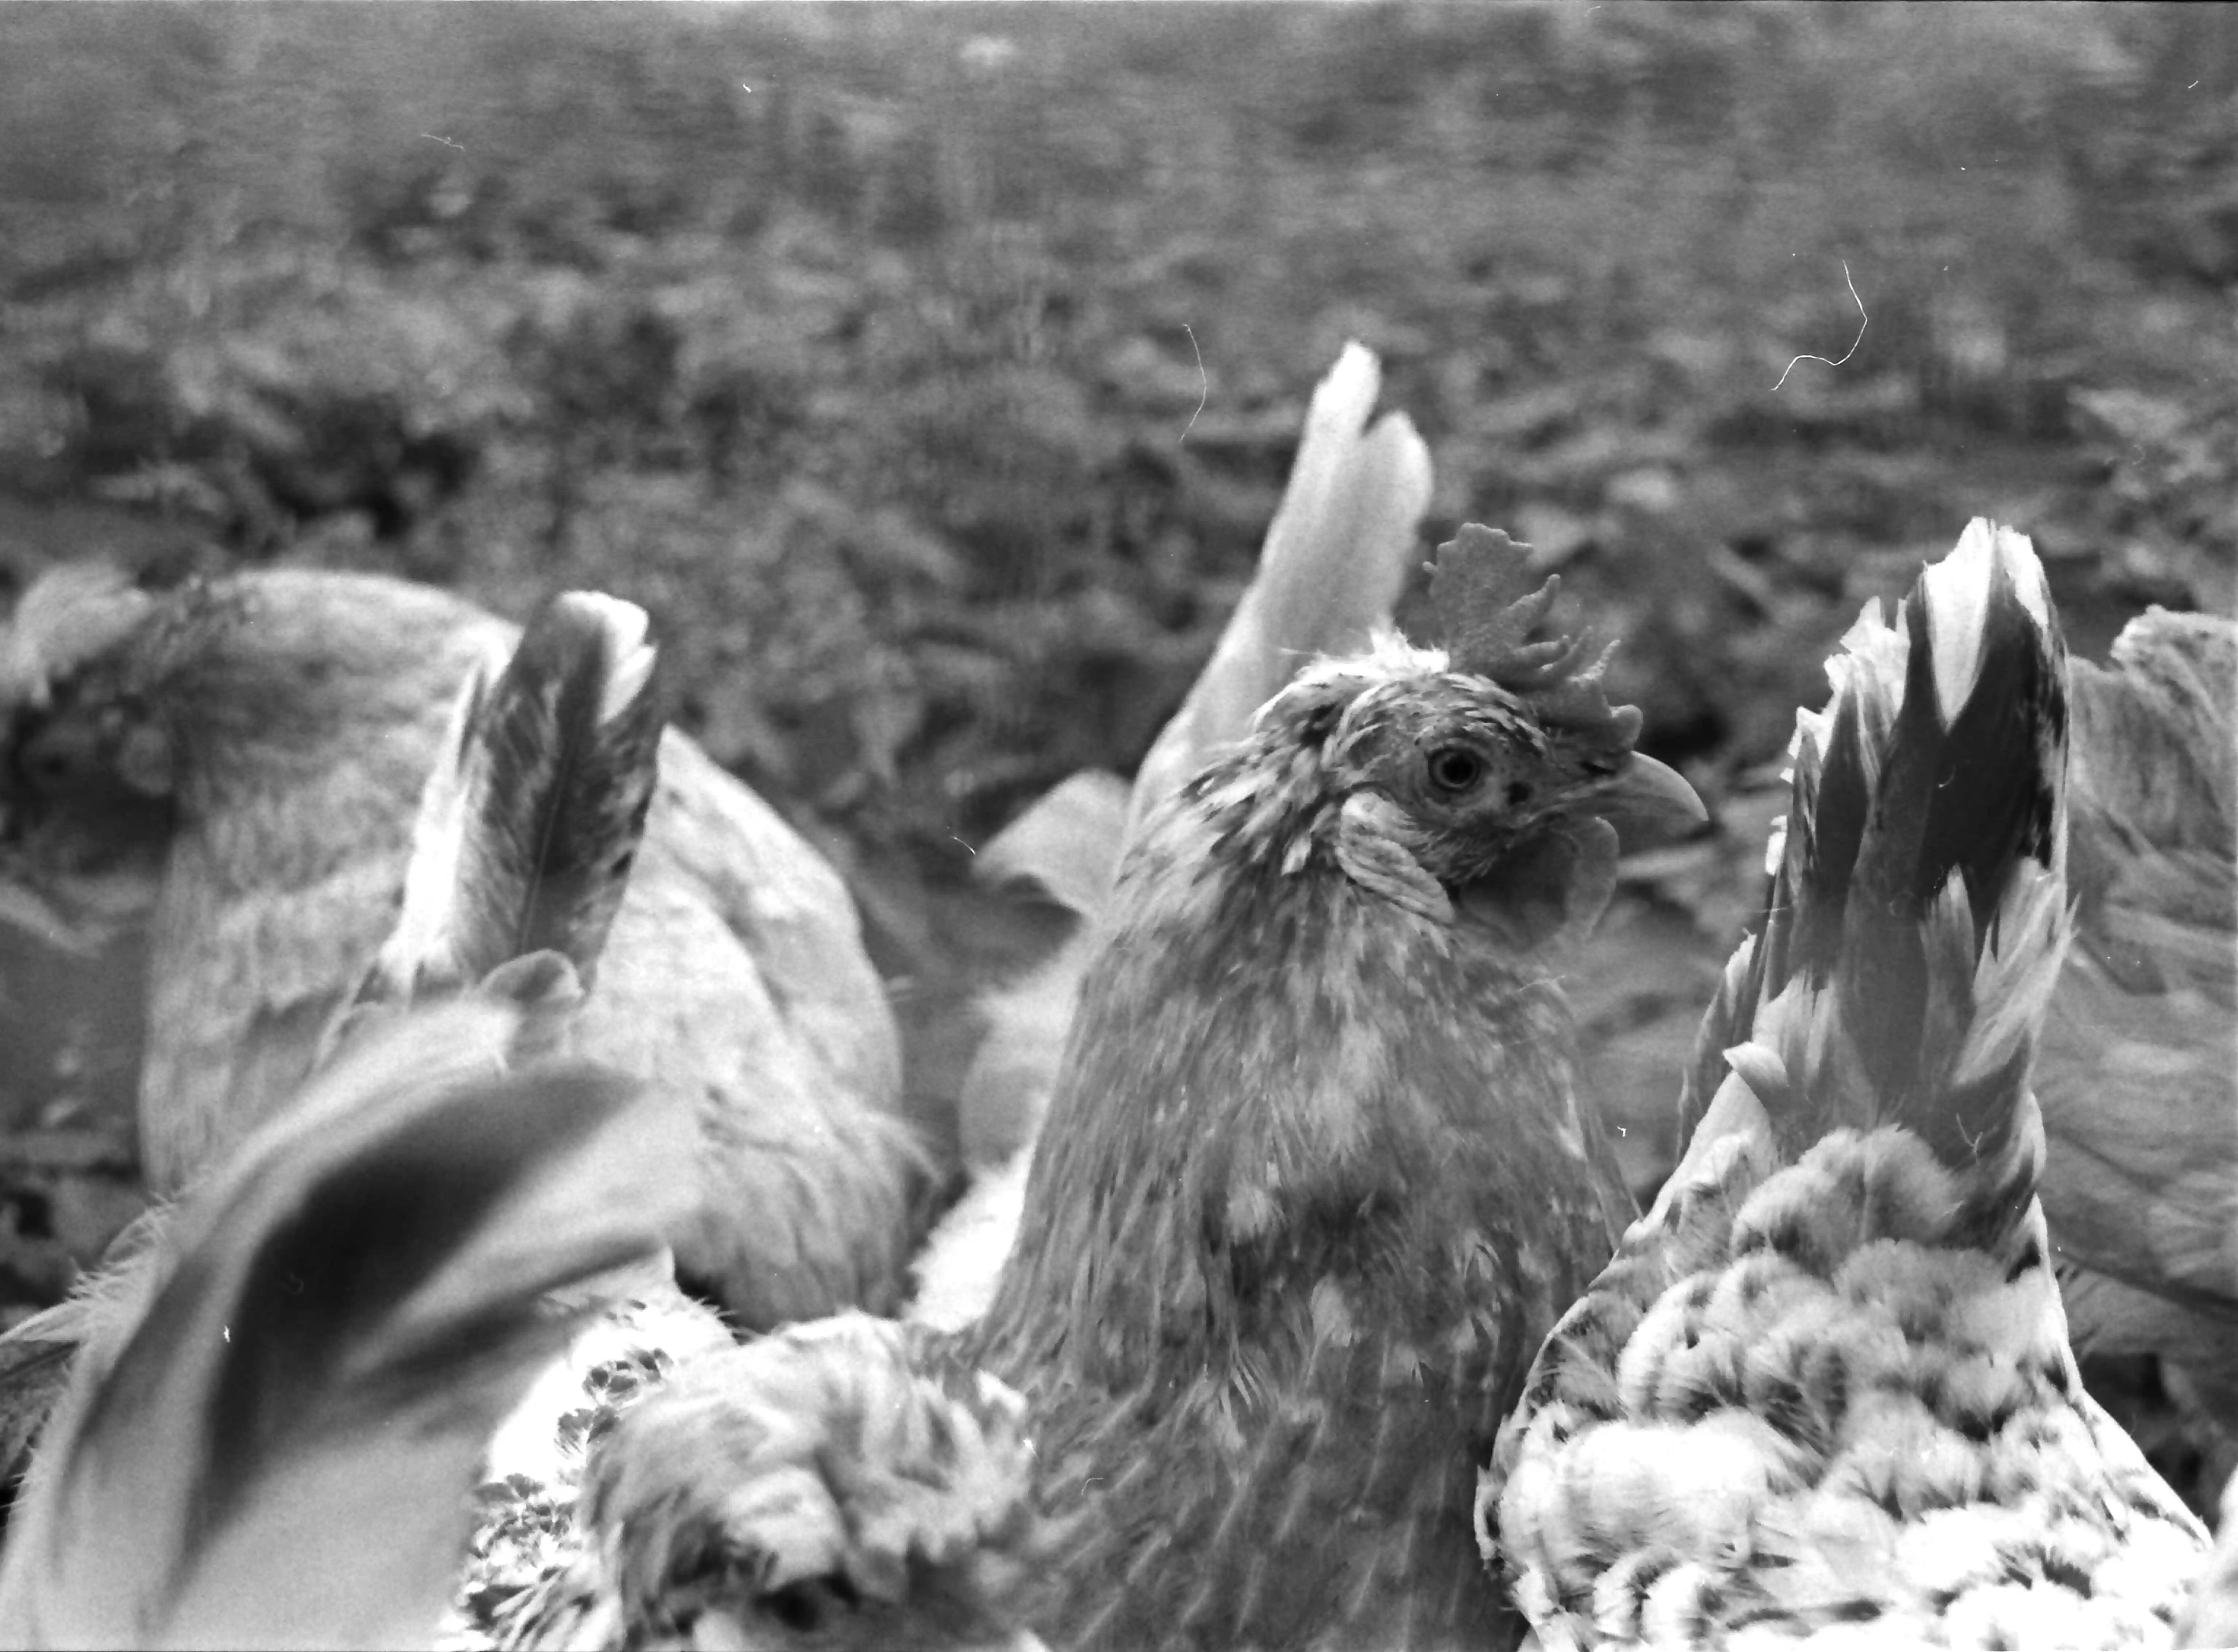 Black and white picture of chickens